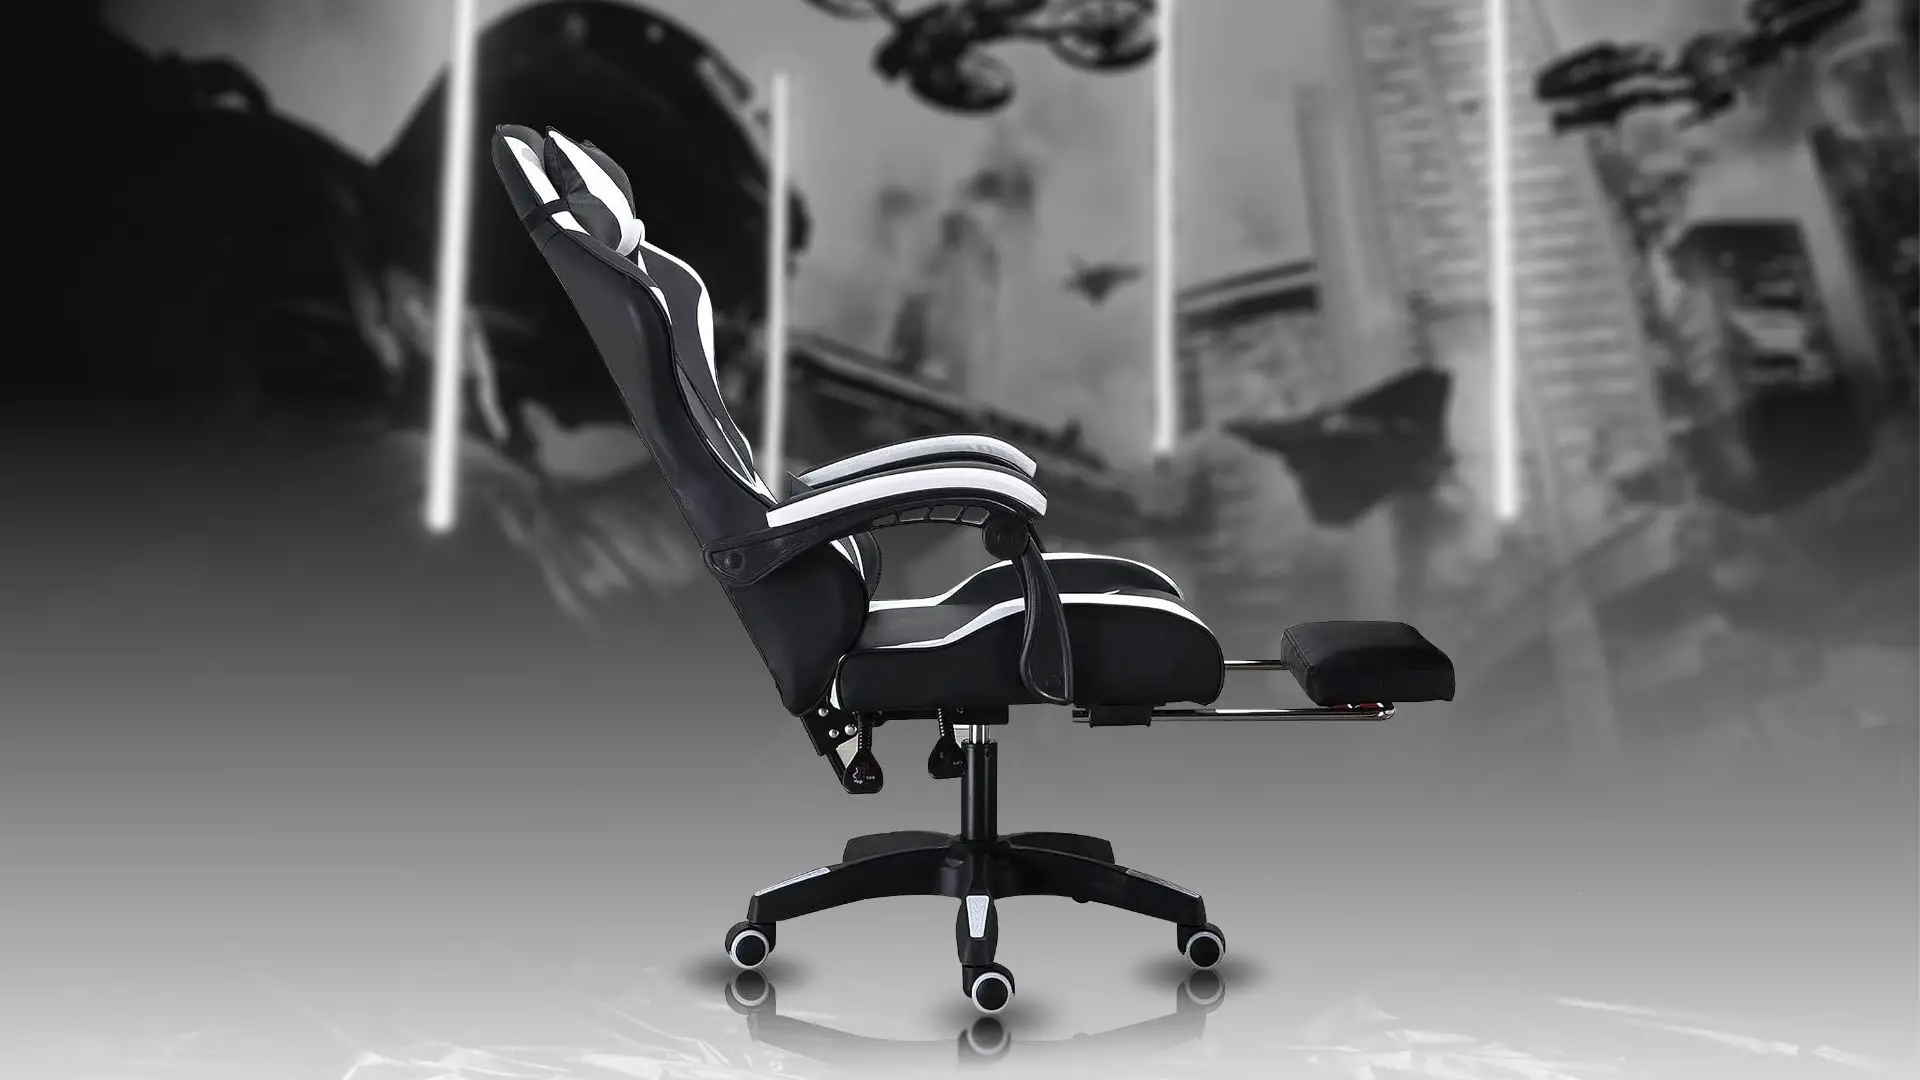 11.QIGRIF Gaming Chair